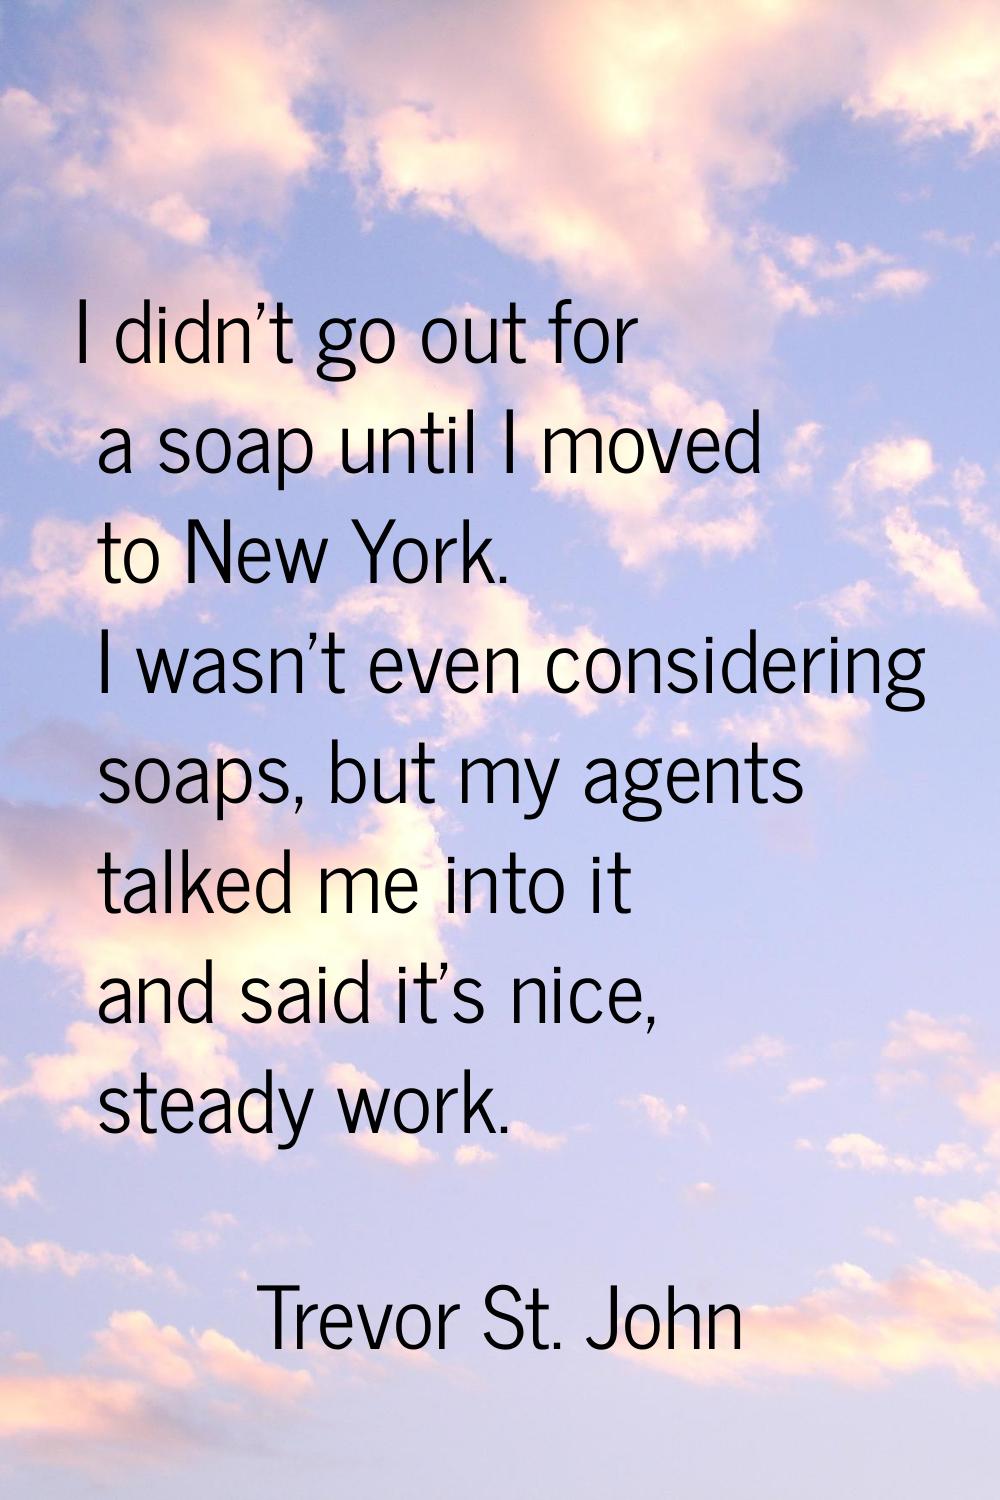 I didn't go out for a soap until I moved to New York. I wasn't even considering soaps, but my agent